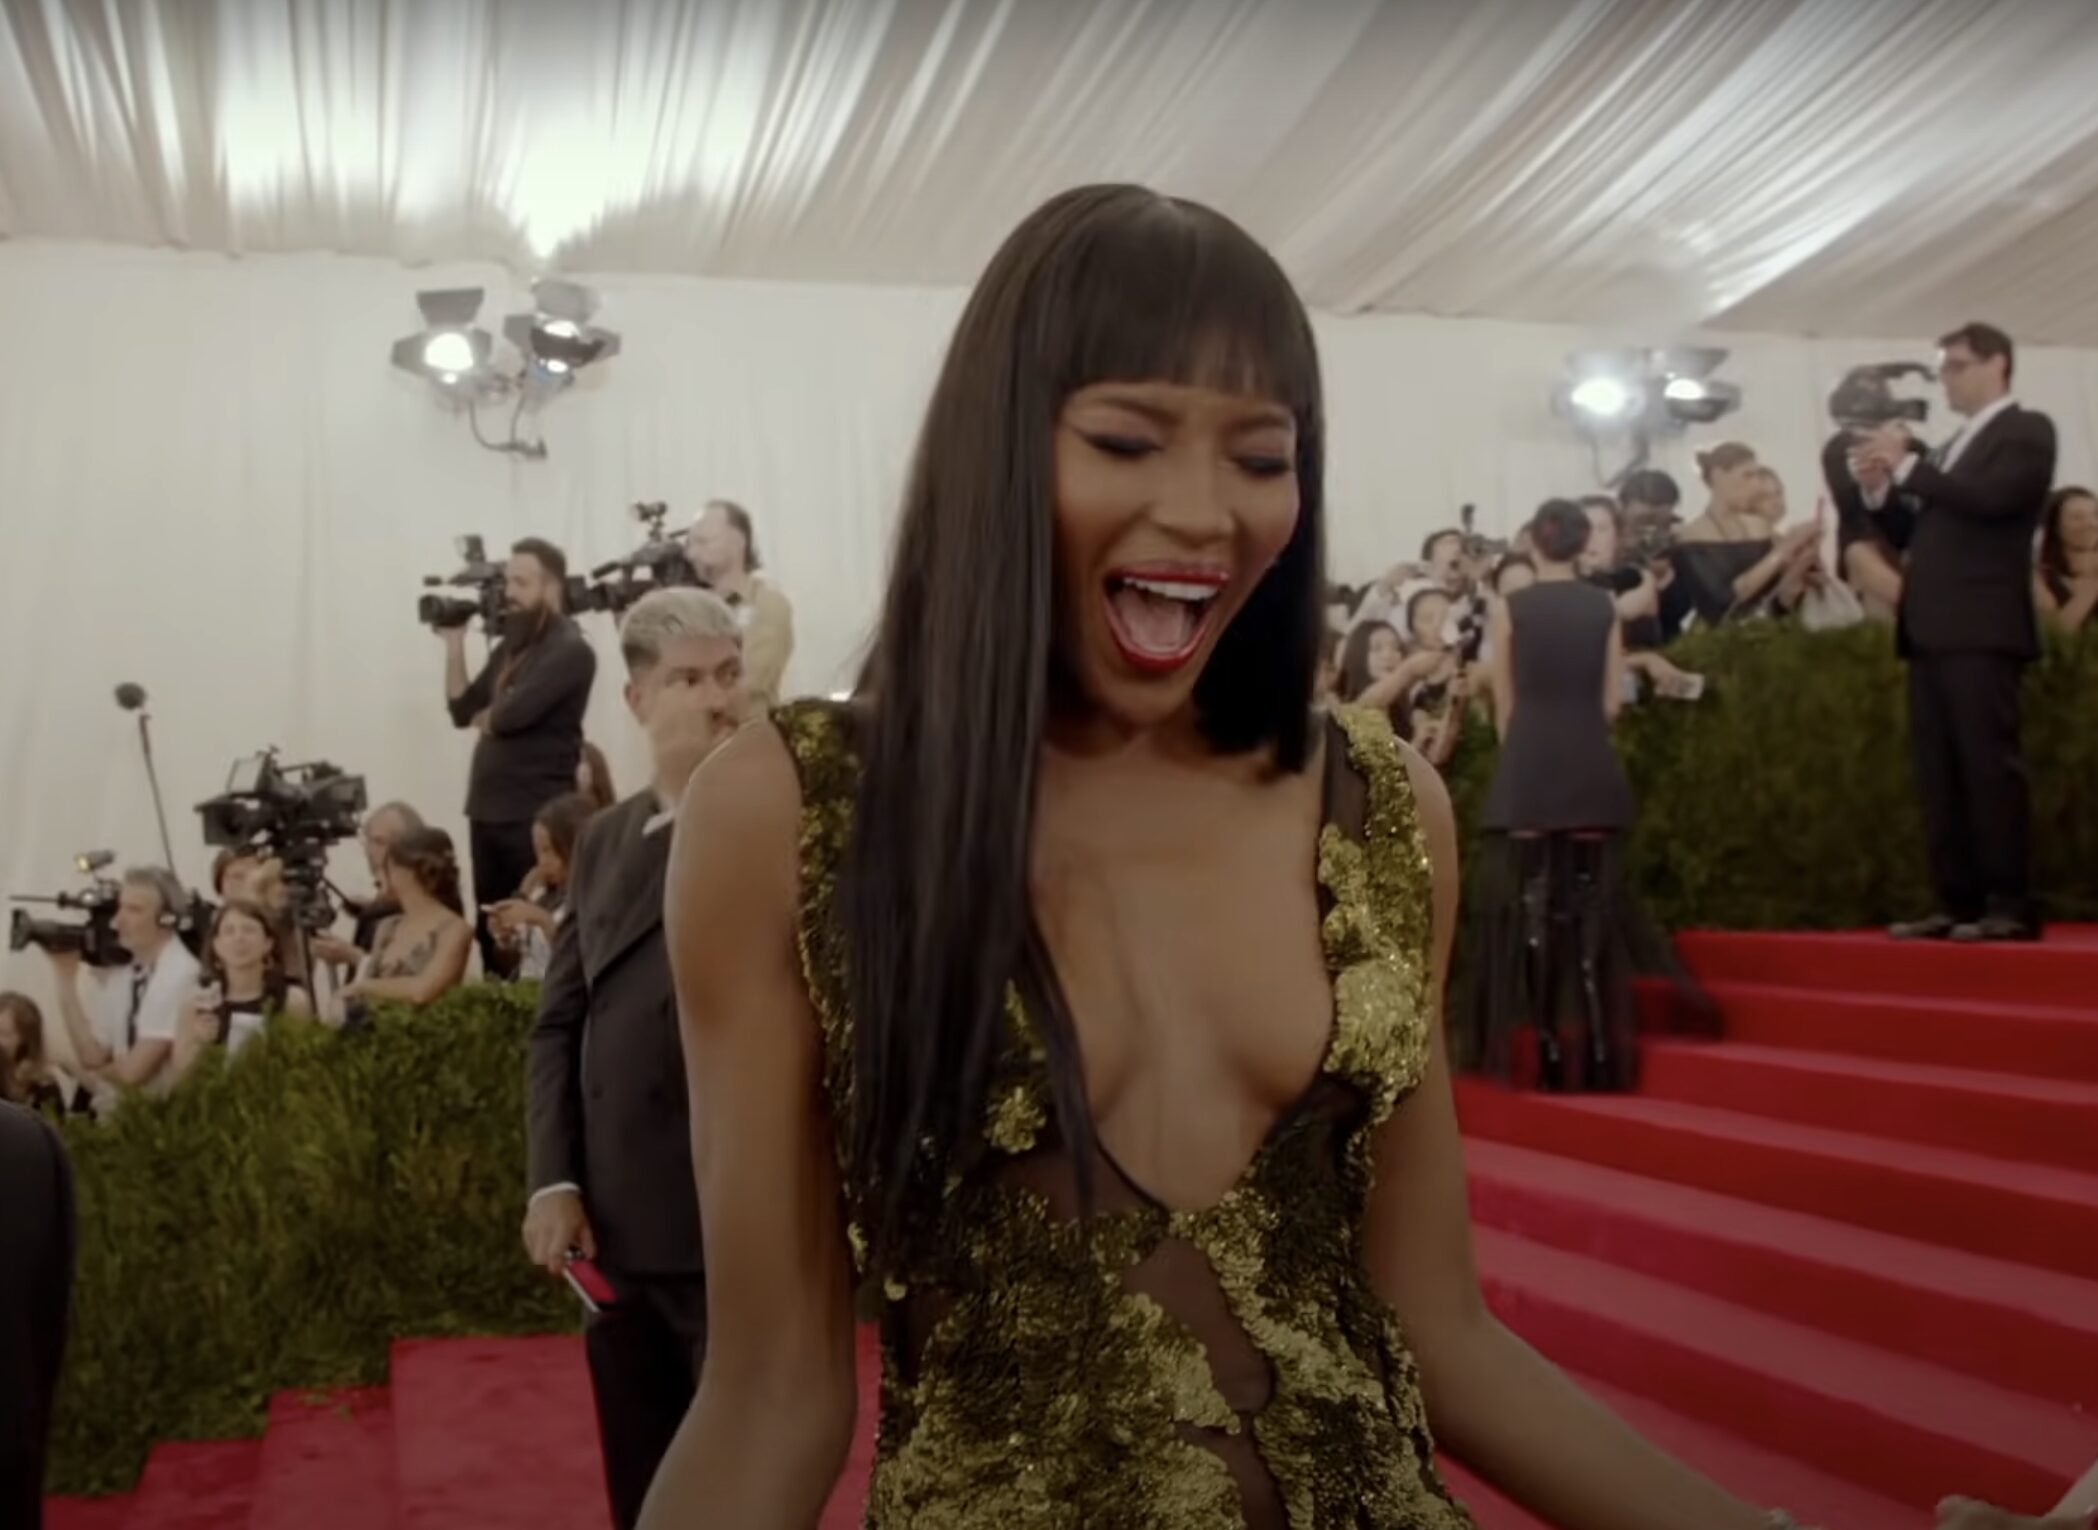 Naomi Campbell, sans persil entre les dents, au Gala du Met, dans le documentaire The first monday in may